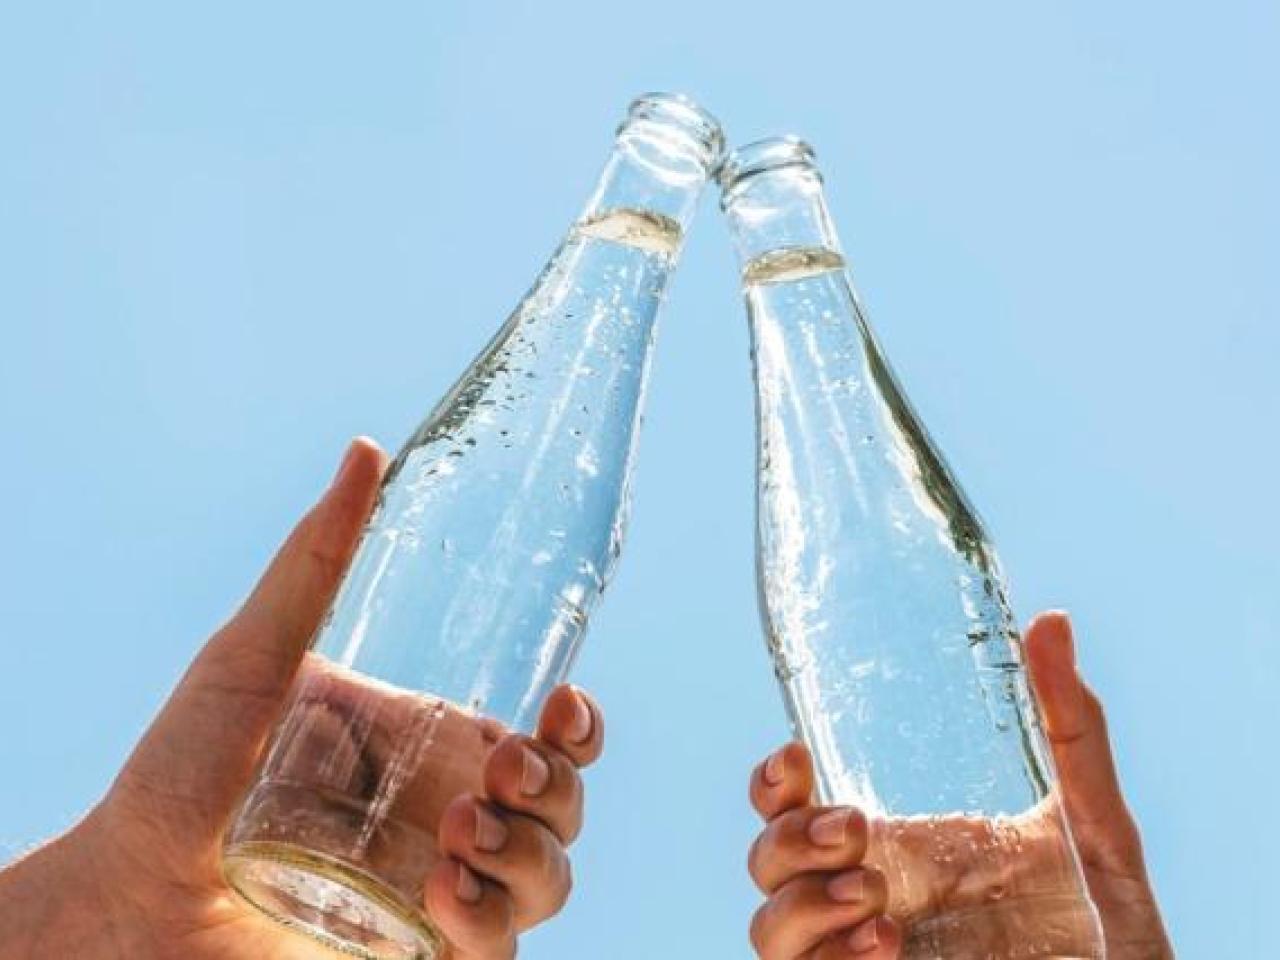 Two hands holding glass bottles, touching at the tops.